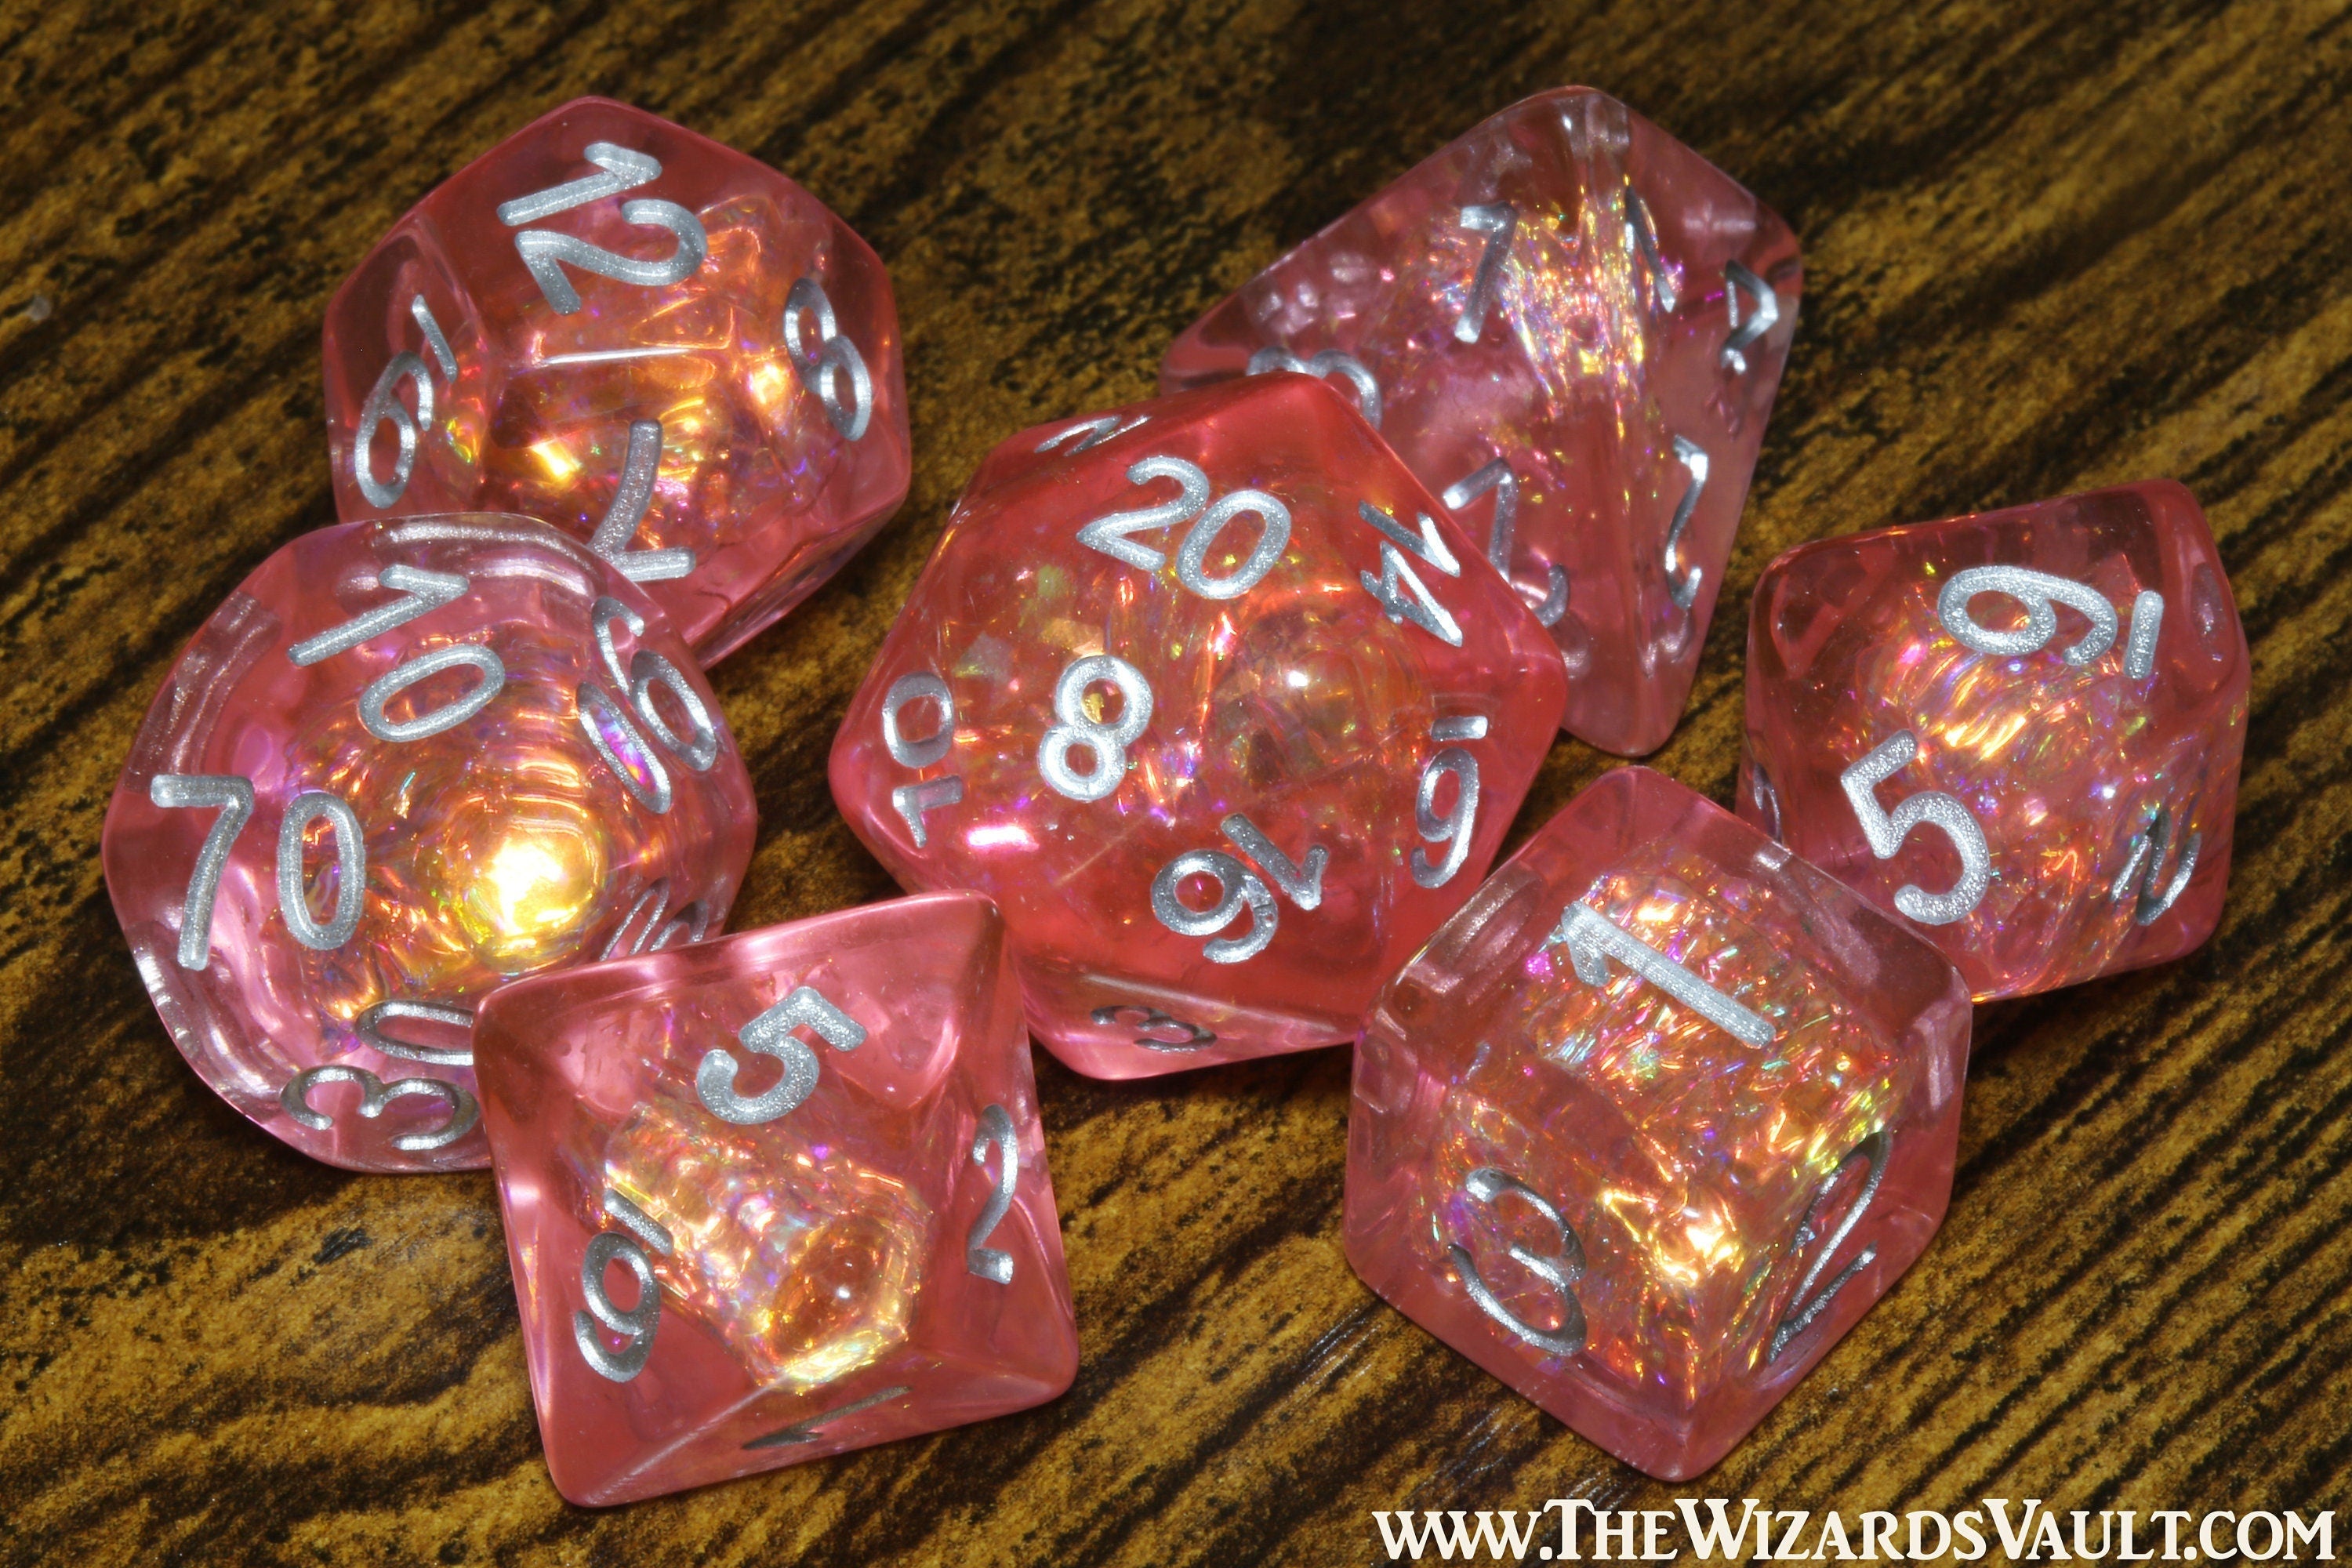 Fire Burst dice set with Holographic foil inclusions DND Dice, Transparent red orange coral pink , Role Playing games Dice storage, D&D - The Wizard's Vault